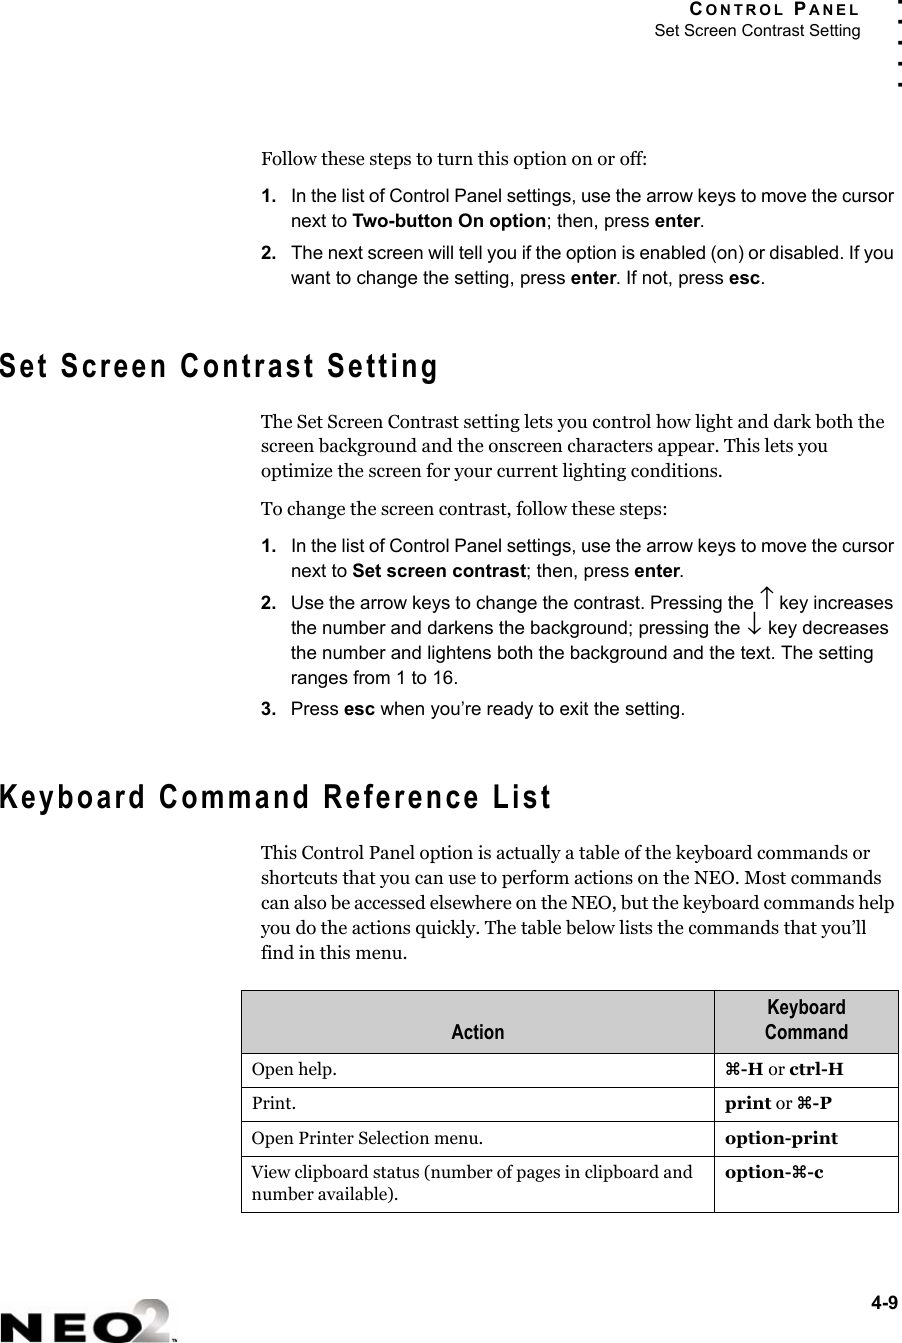 CONTROL PANELSet Screen Contrast Setting4-9. . . . .Follow these steps to turn this option on or off:1. In the list of Control Panel settings, use the arrow keys to move the cursor next to Two-button On option; then, press enter.2. The next screen will tell you if the option is enabled (on) or disabled. If you want to change the setting, press enter. If not, press esc.Set Screen Contrast SettingThe Set Screen Contrast setting lets you control how light and dark both the screen background and the onscreen characters appear. This lets you optimize the screen for your current lighting conditions.To change the screen contrast, follow these steps:1. In the list of Control Panel settings, use the arrow keys to move the cursor next to Set screen contrast; then, press enter.2. Use the arrow keys to change the contrast. Pressing the ↑ key increases the number and darkens the background; pressing the ↓ key decreases the number and lightens both the background and the text. The setting ranges from 1 to 16.3. Press esc when you’re ready to exit the setting.Keyboard Command Reference ListThis Control Panel option is actually a table of the keyboard commands or shortcuts that you can use to perform actions on the NEO. Most commands can also be accessed elsewhere on the NEO, but the keyboard commands help you do the actions quickly. The table below lists the commands that you’ll find in this menu.ActionKeyboard CommandOpen help. z-H or ctrl-HPrint. print or z-POpen Printer Selection menu. option-printView clipboard status (number of pages in clipboard and number available).option-z-c